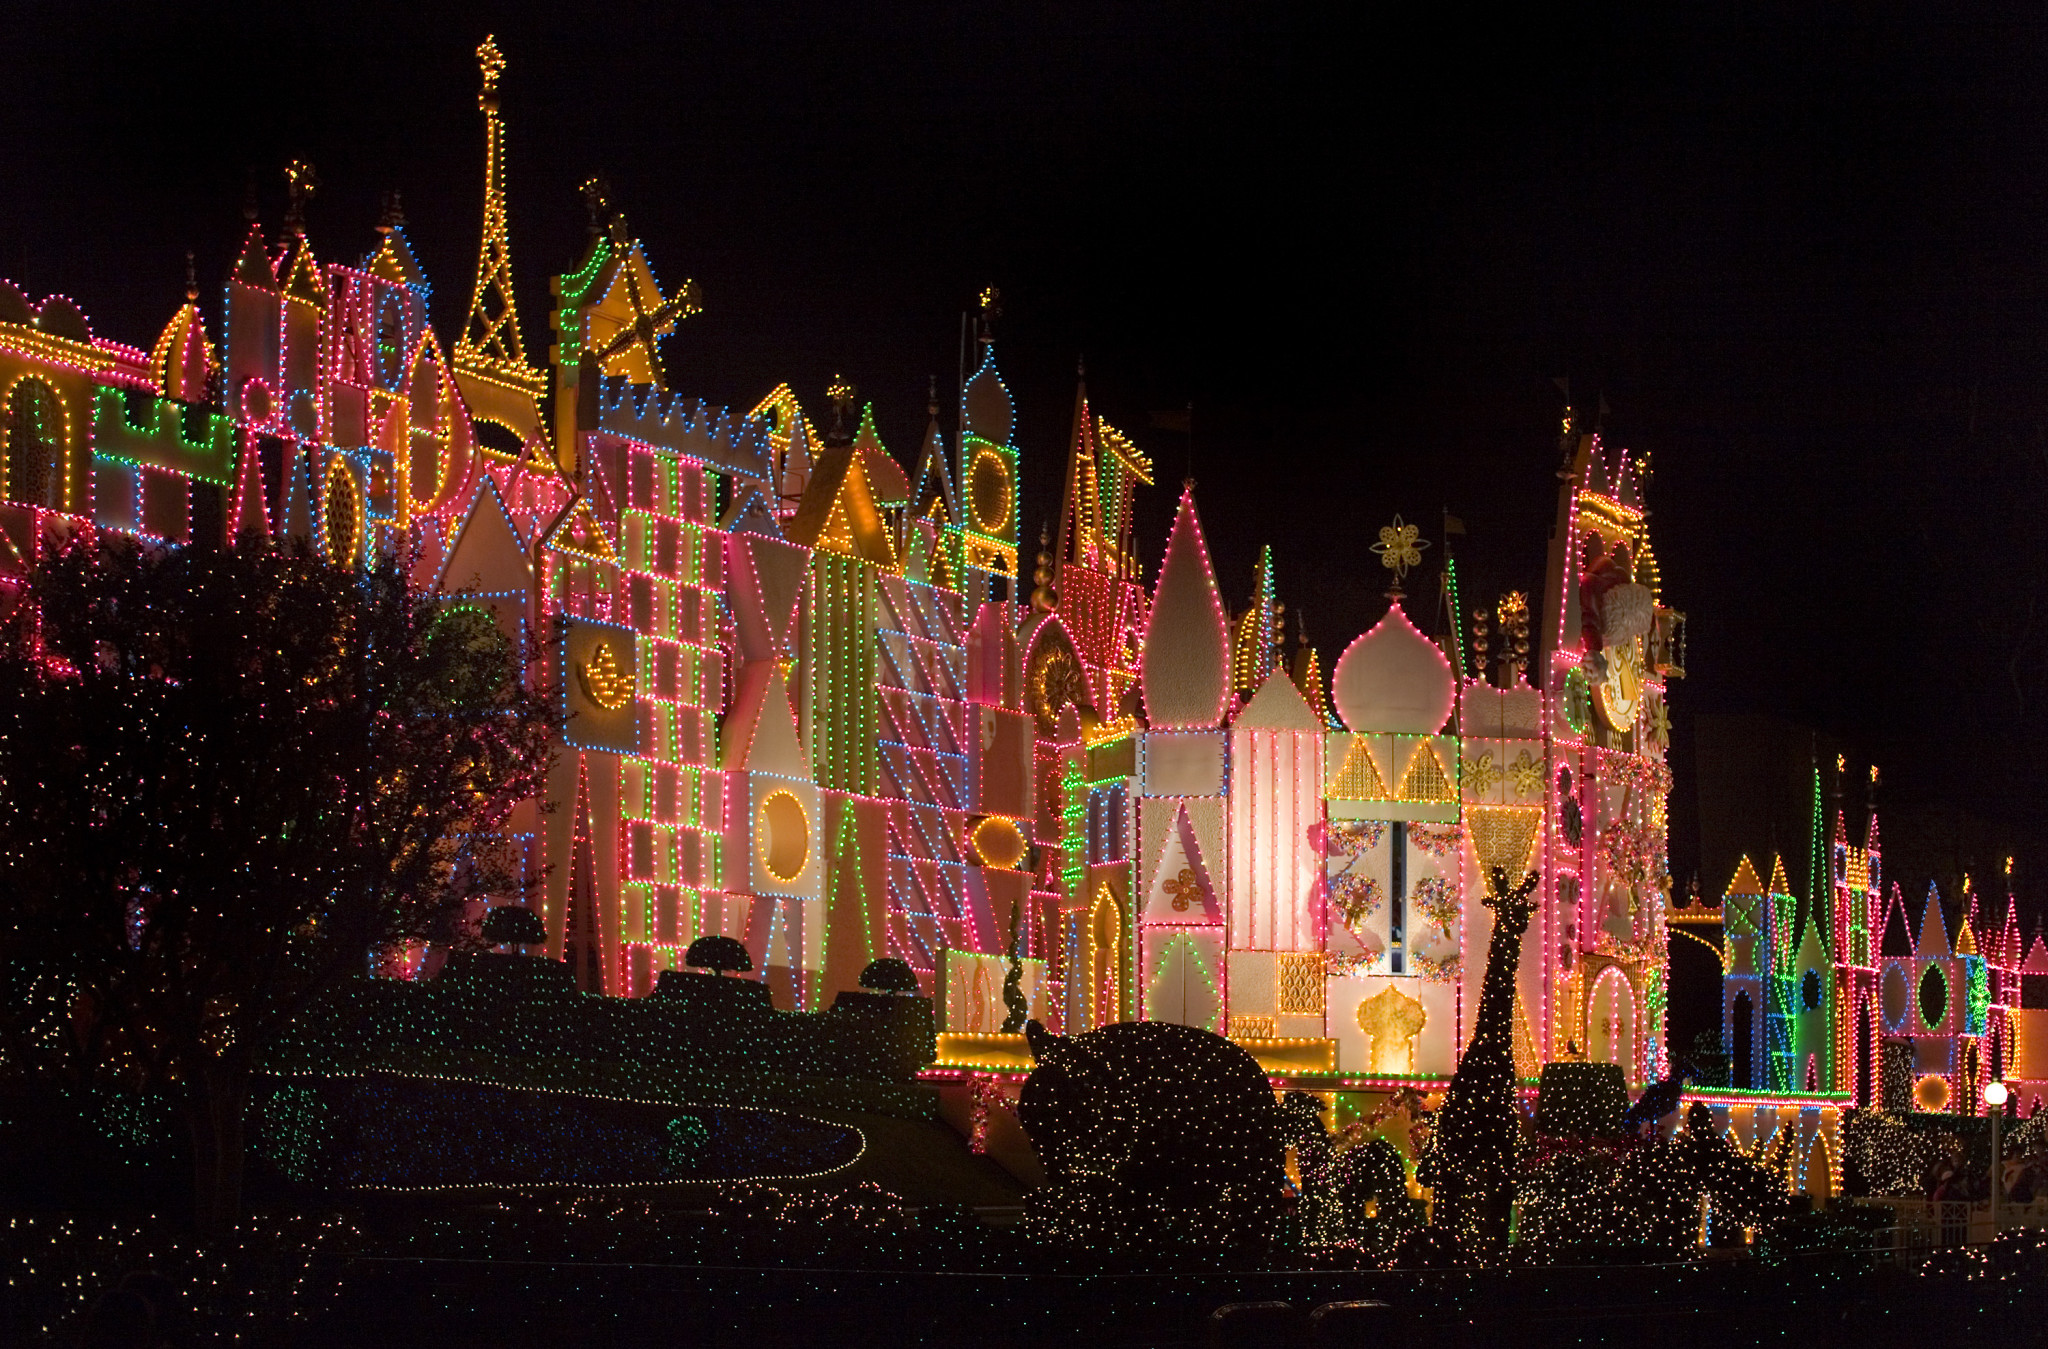 New Scent Overlays Coming to “it’s a small world” Holiday in Disneyland!